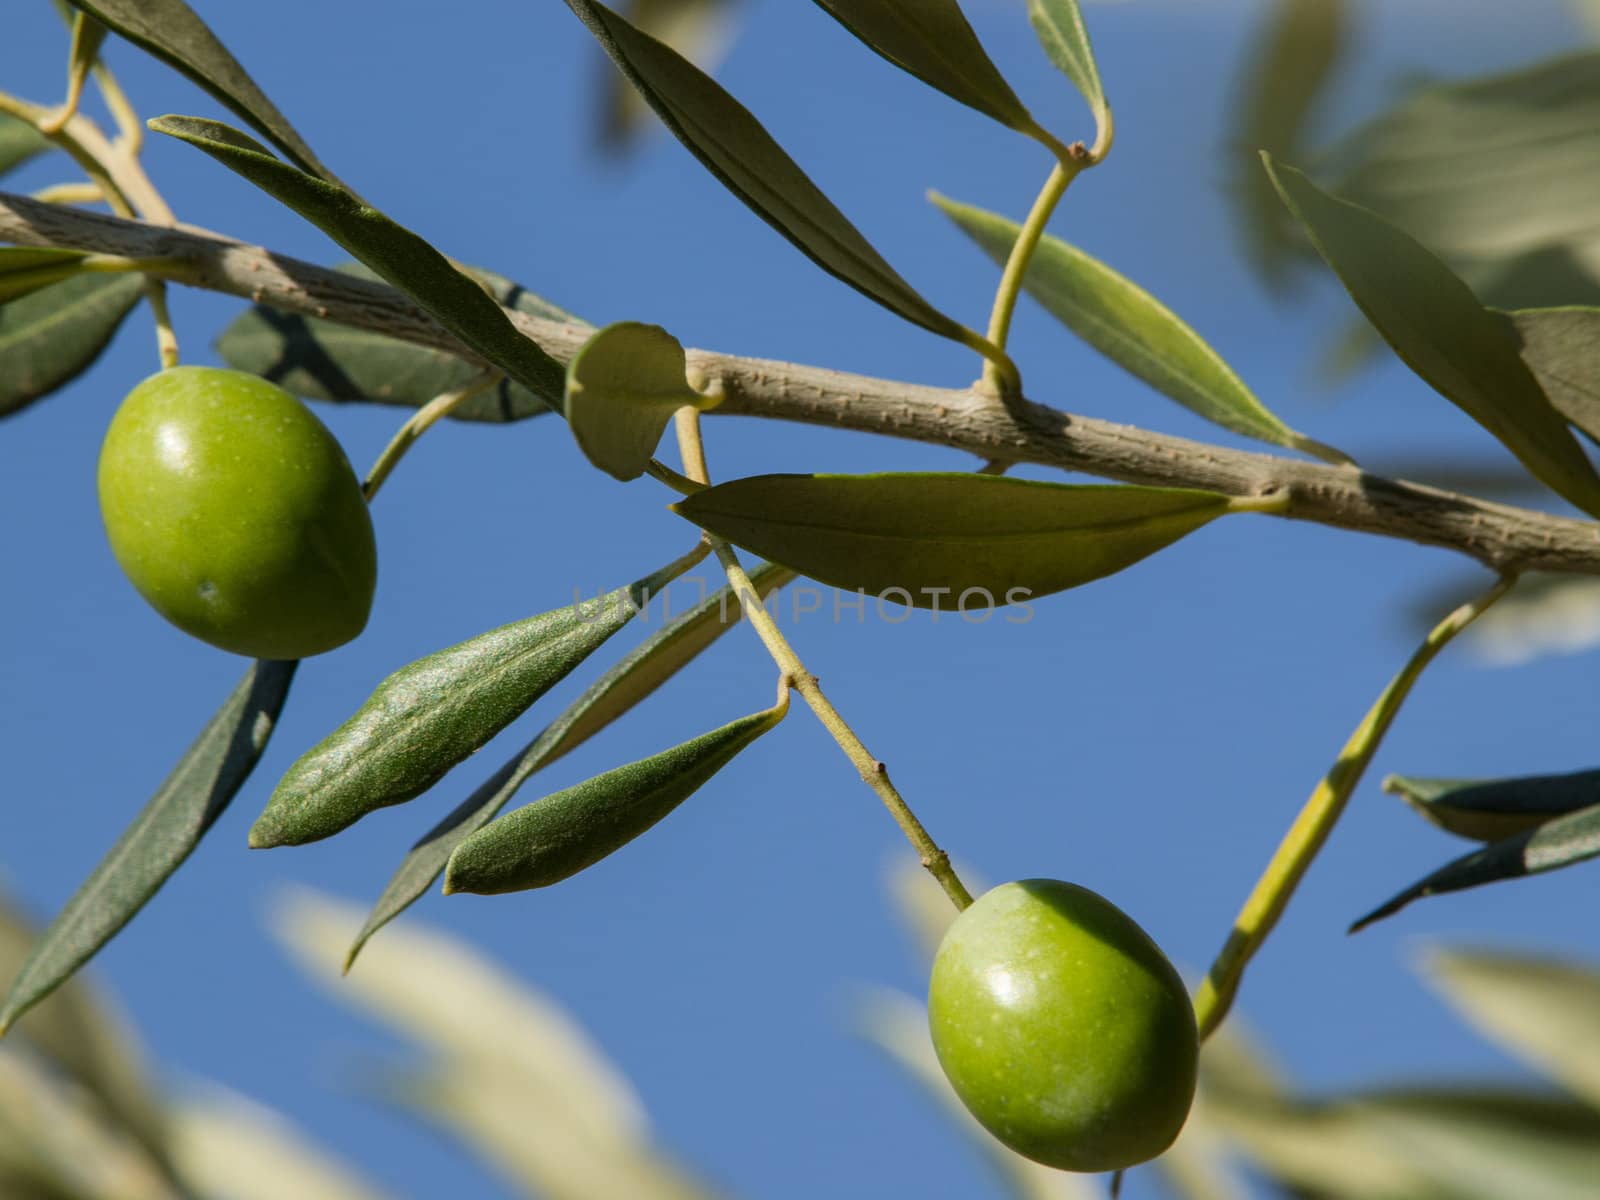 Olive tree with many colorful fruits